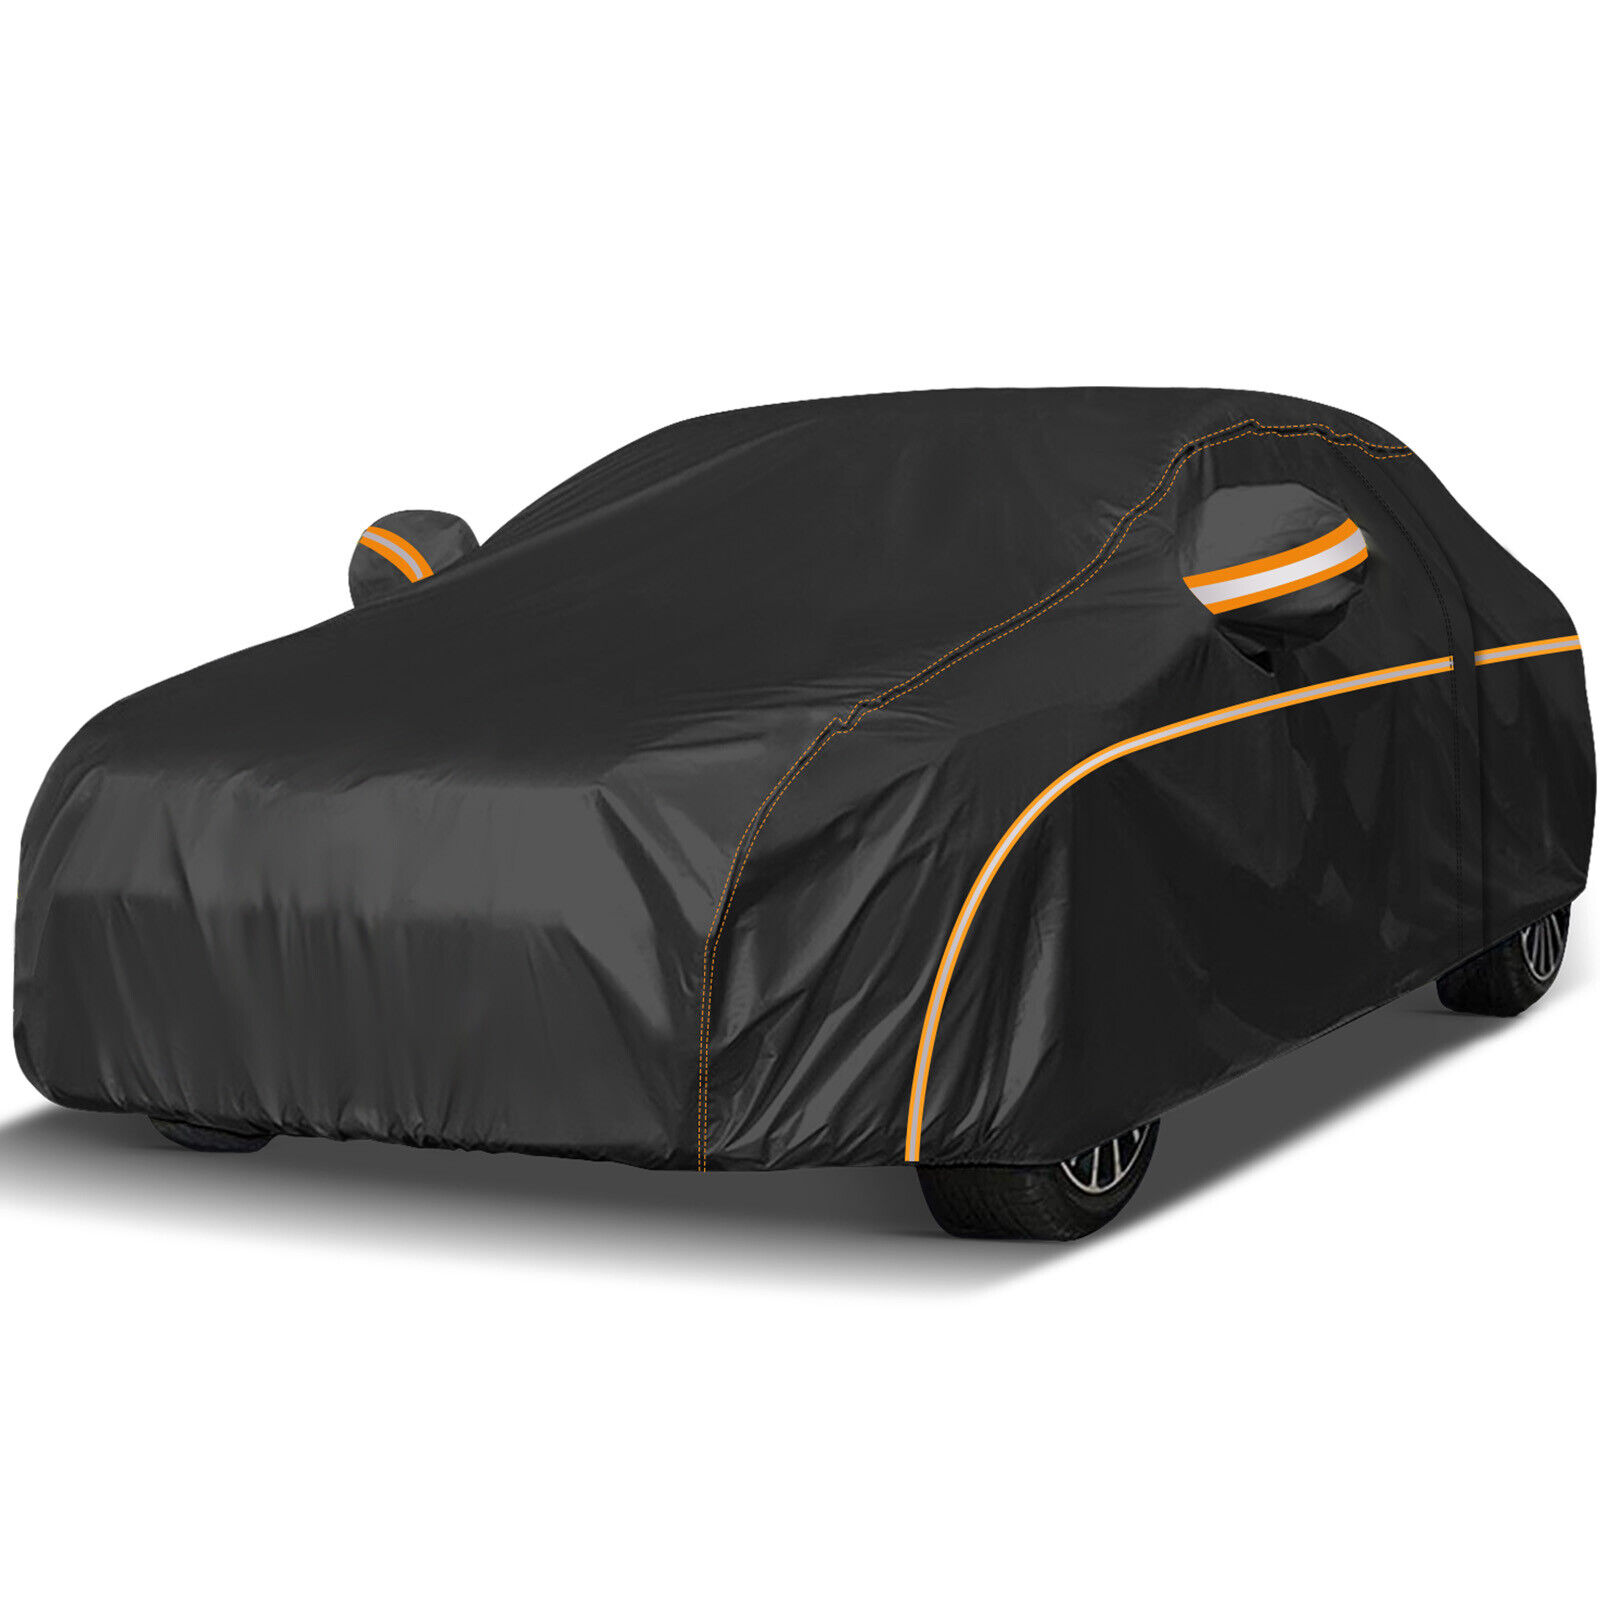 NEVERLAND Car Cover All Weather Protection Anti-UV Sun Dust Fit 4.3m-4.6m Sedan